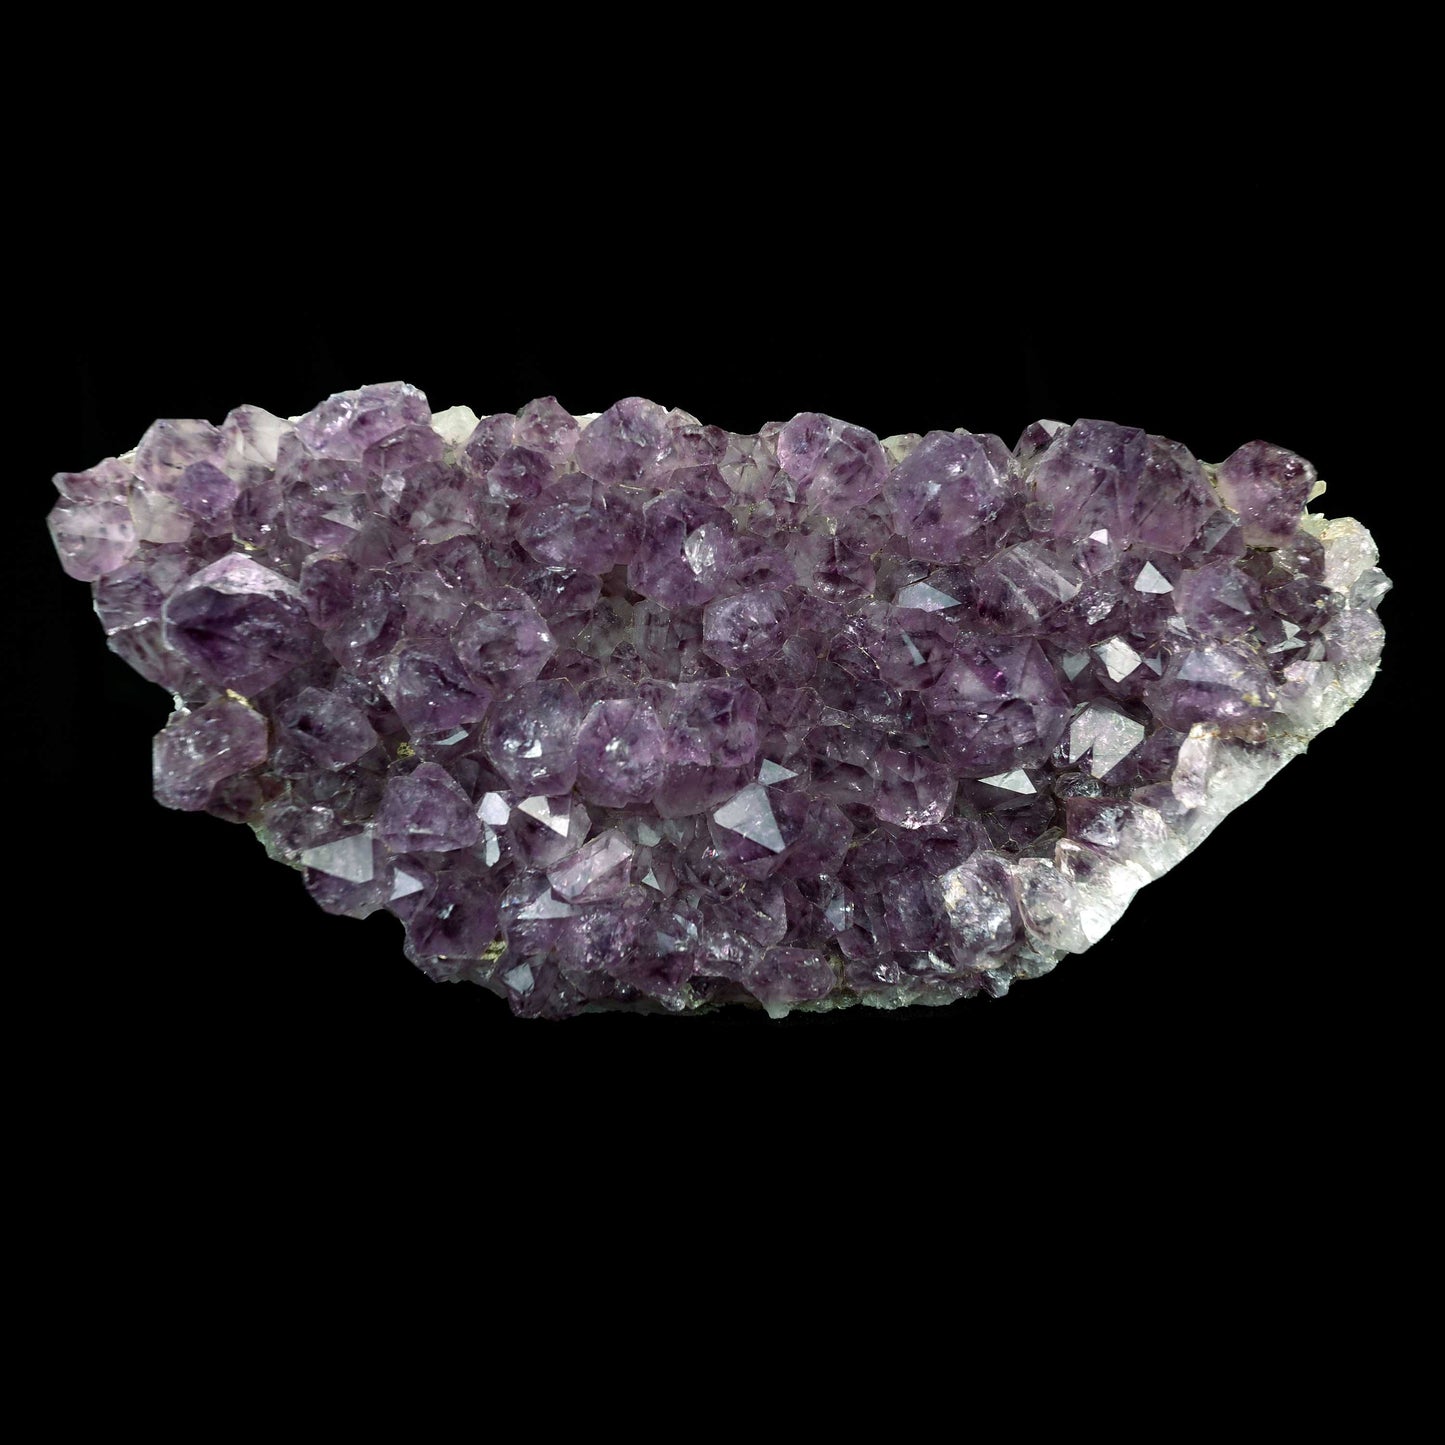 Purple Amethyst Plate Natural Mineral Specimen # B 4374  https://www.superbminerals.us/products/purple-amethyst-plate-natural-mineral-specimen-b-4374  Features:A very large plate of lustrous, large deep-purple Amethyst crystals with two clusters (one large and one smaller) of highly translucent, colorless, intergrown parallel “nailhead spar” crystals emanating from the center of the plate of Amethyst. It is incredible! Amazing color, luster, symmetry and crystal 